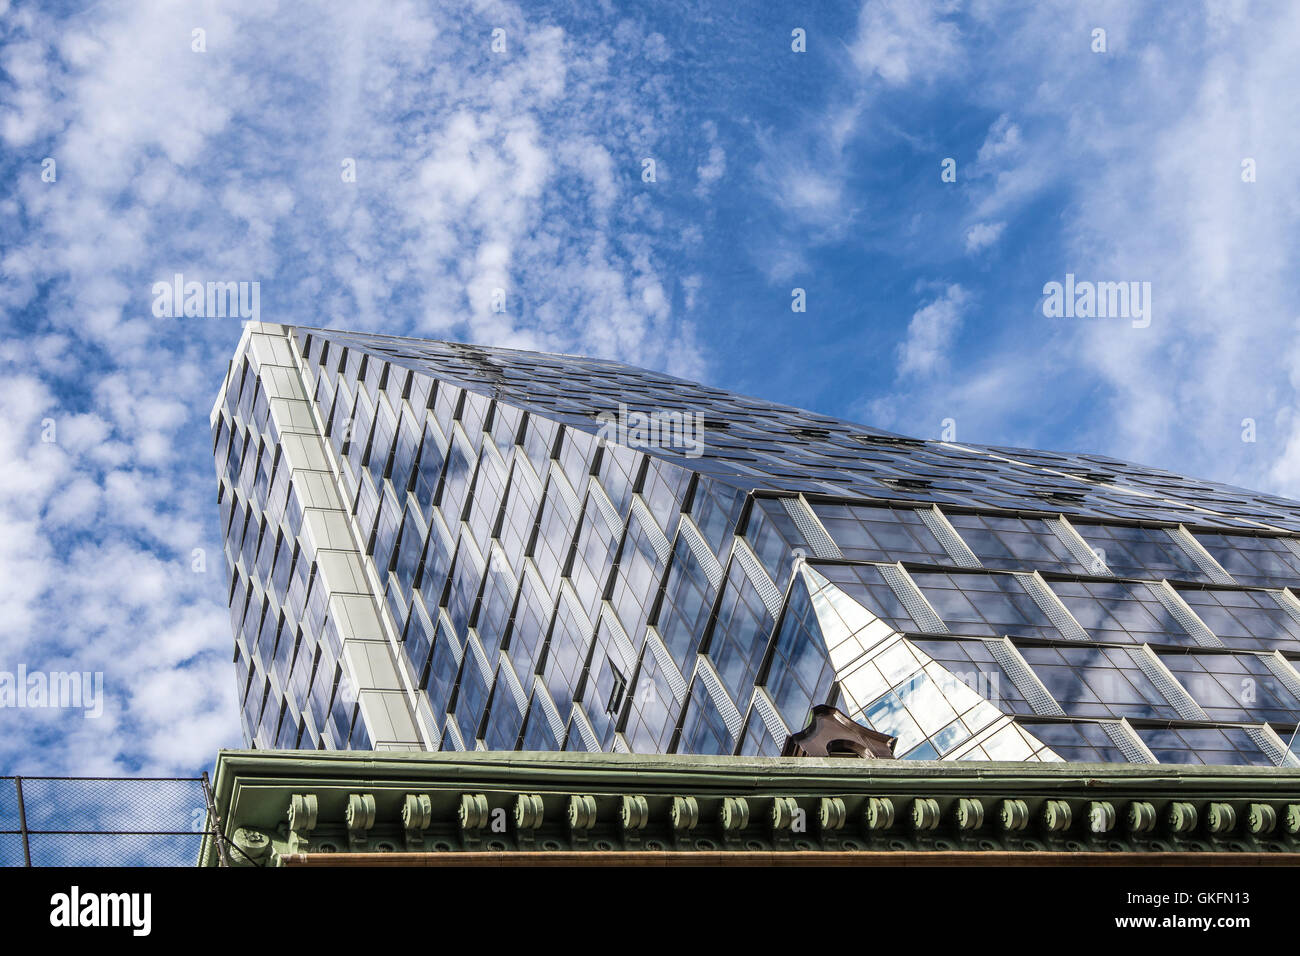 A high rise building with glass exterior Stock Photo